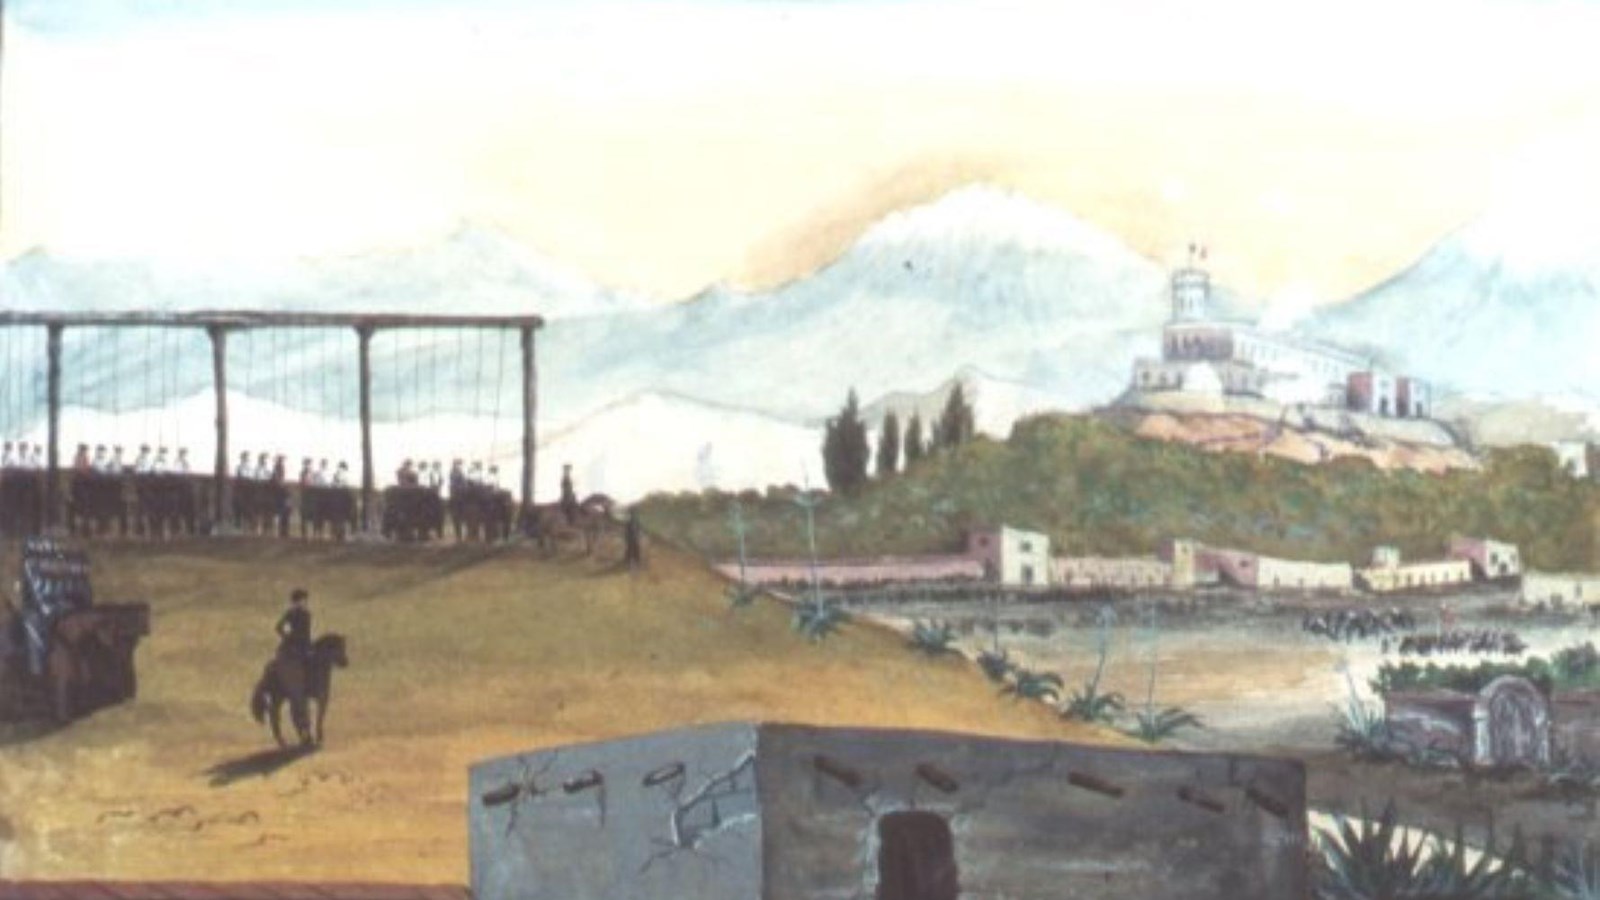 color engraving of a mass hanging on a large gallows in front of a castle and mountain.